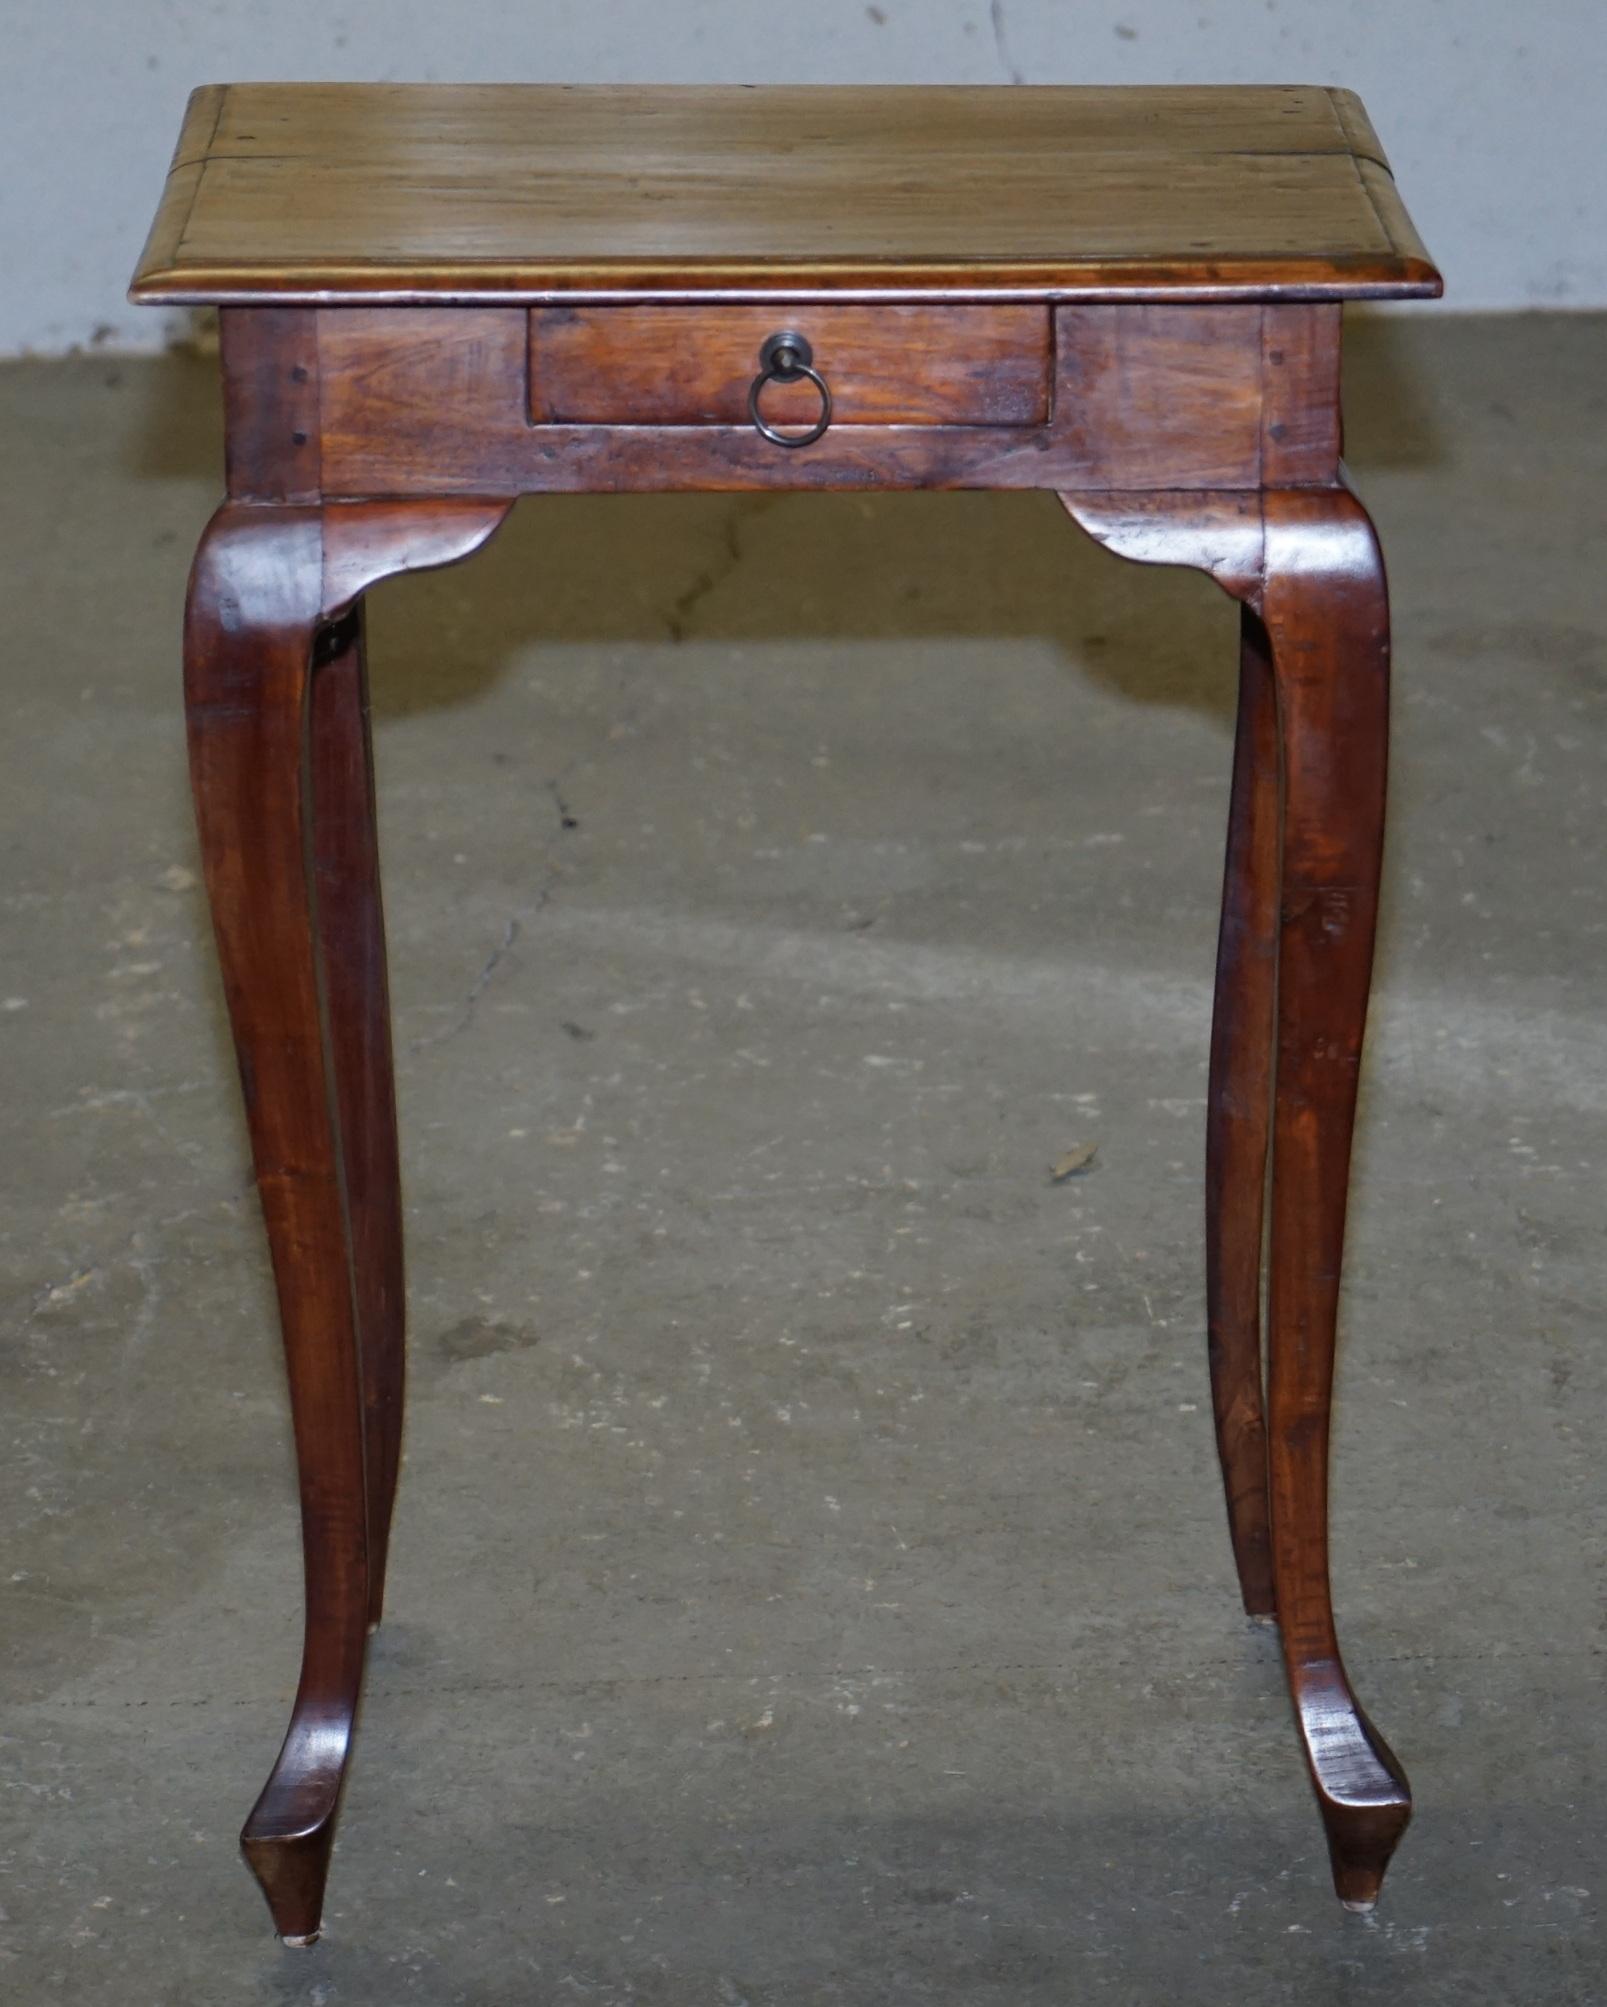 We are delighted to offer for sale this lovely side table in mahogany with a single drawer

This is a cute side table, its nicely dowelled using very old techniques, the legs are elegantly sculptured and it genuinely looks nice in any